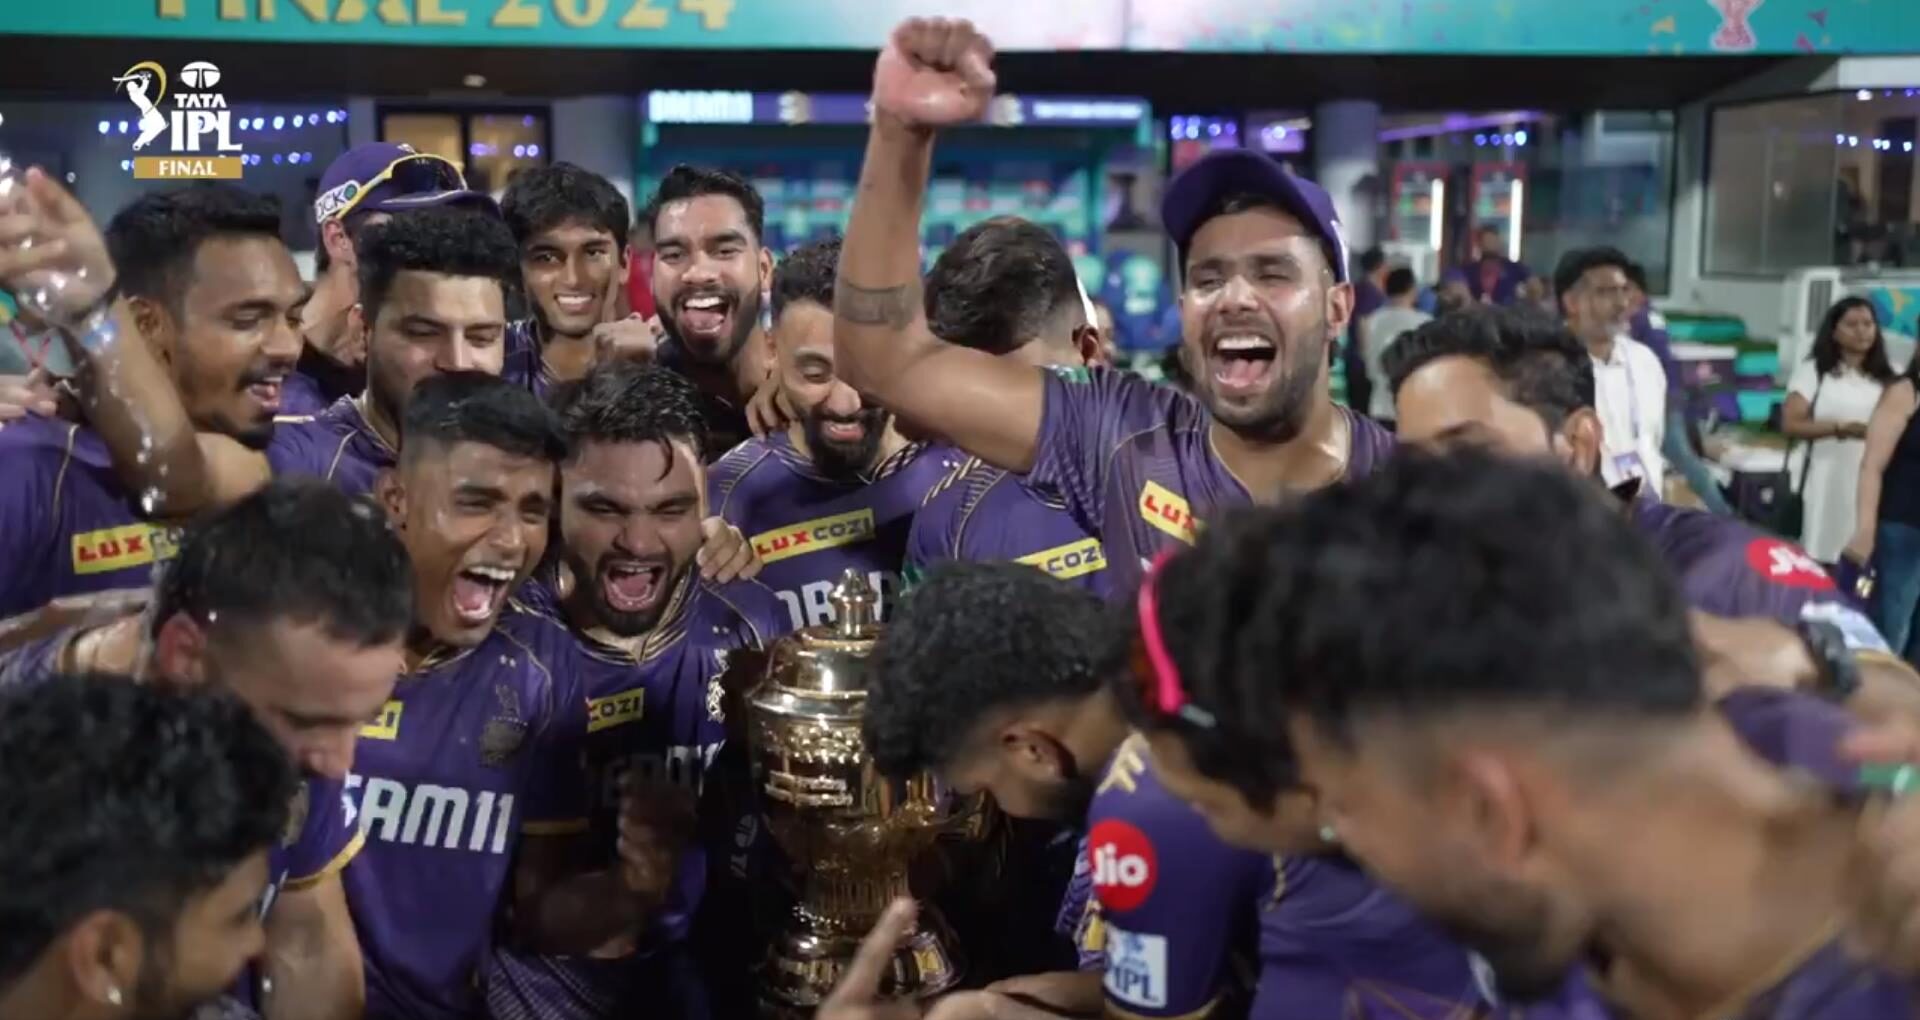 KKR Wins Third IPL Title with Dominant Eight-Wicket Victory Over SRH